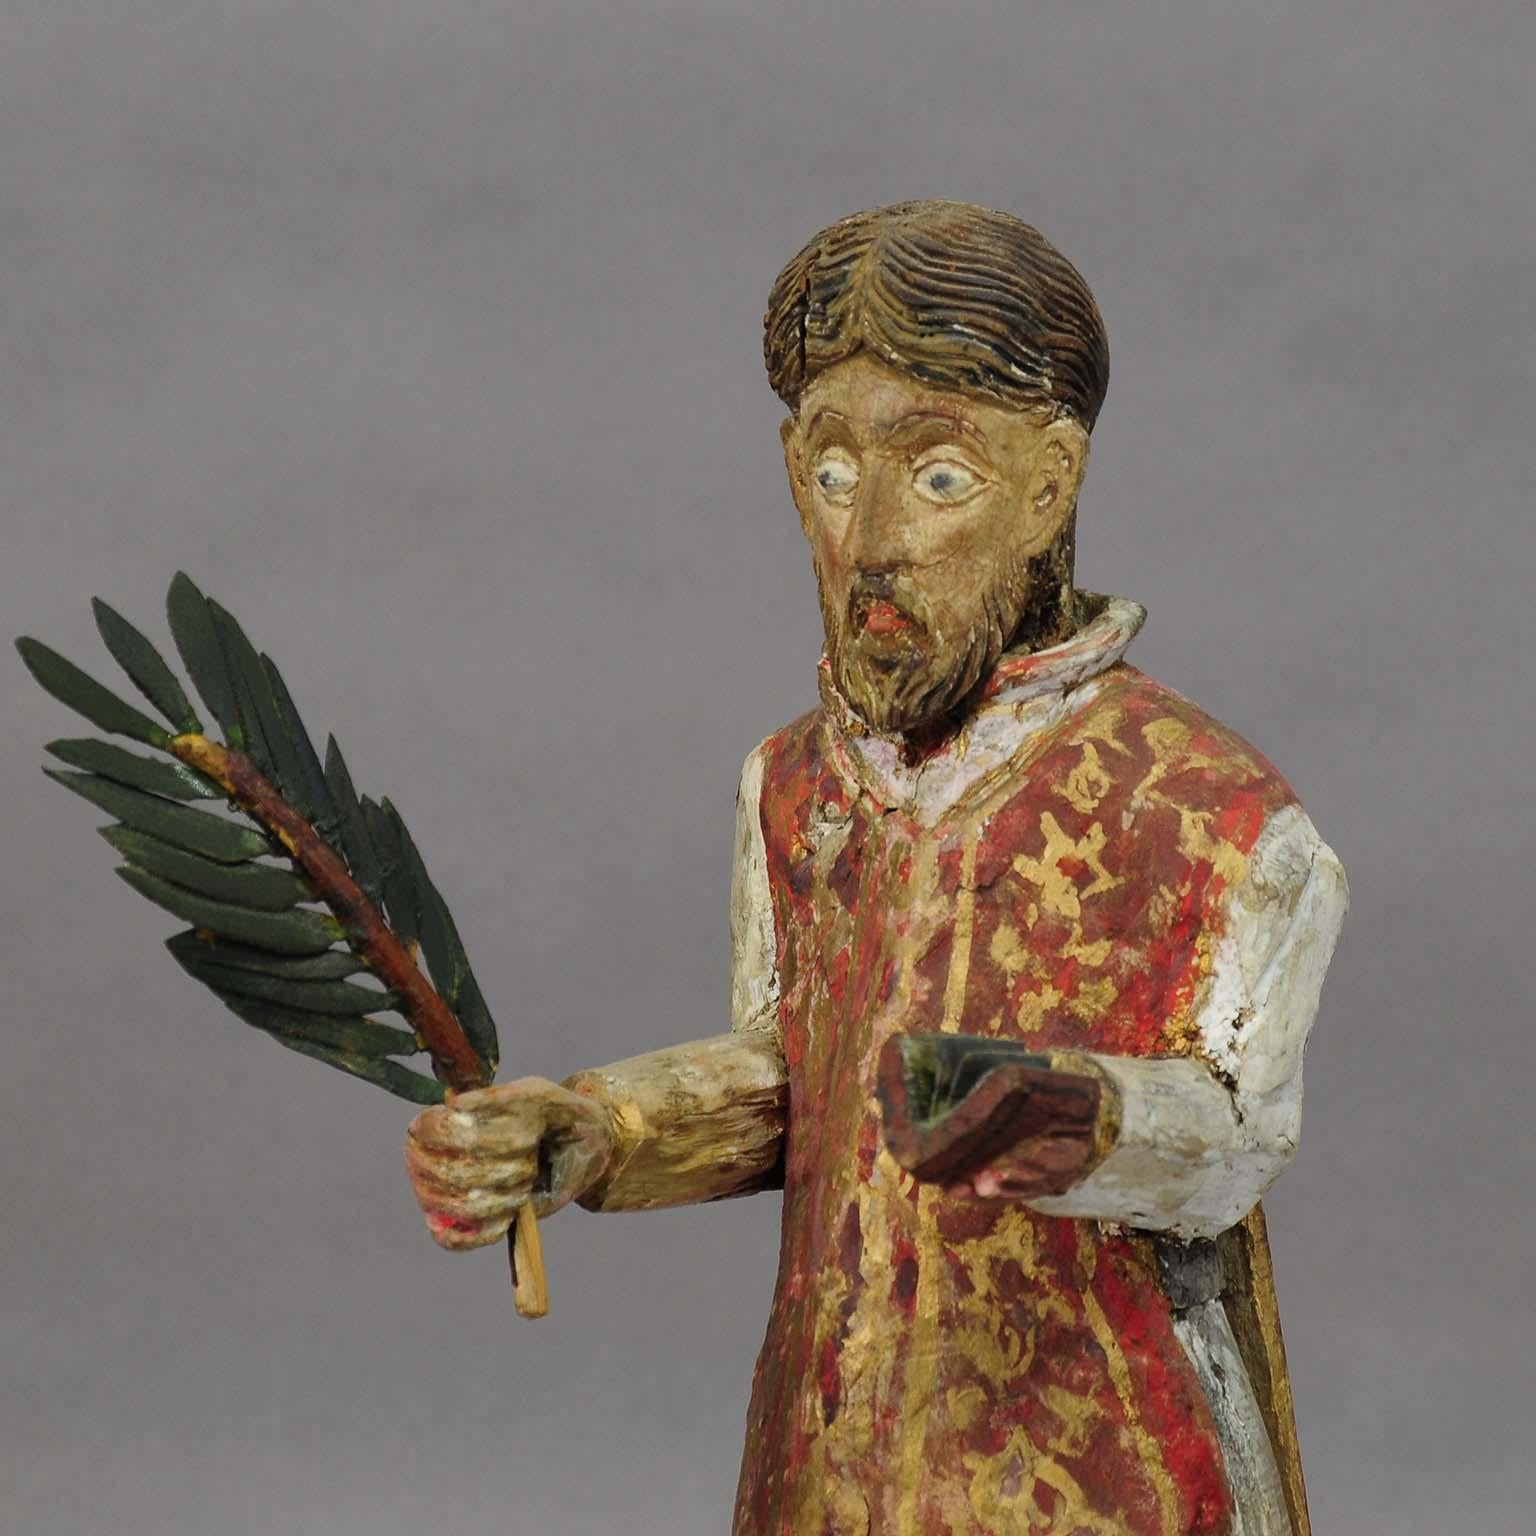 Wooden Carved Sculpture of a Saint, circa 1850

A beautifully hand carved and hand painted sculpture of a saint with a palm-branch. It is made most probably in Armenian or Georgian artcrafts ca. 1850.

Measures:
Width 5.51